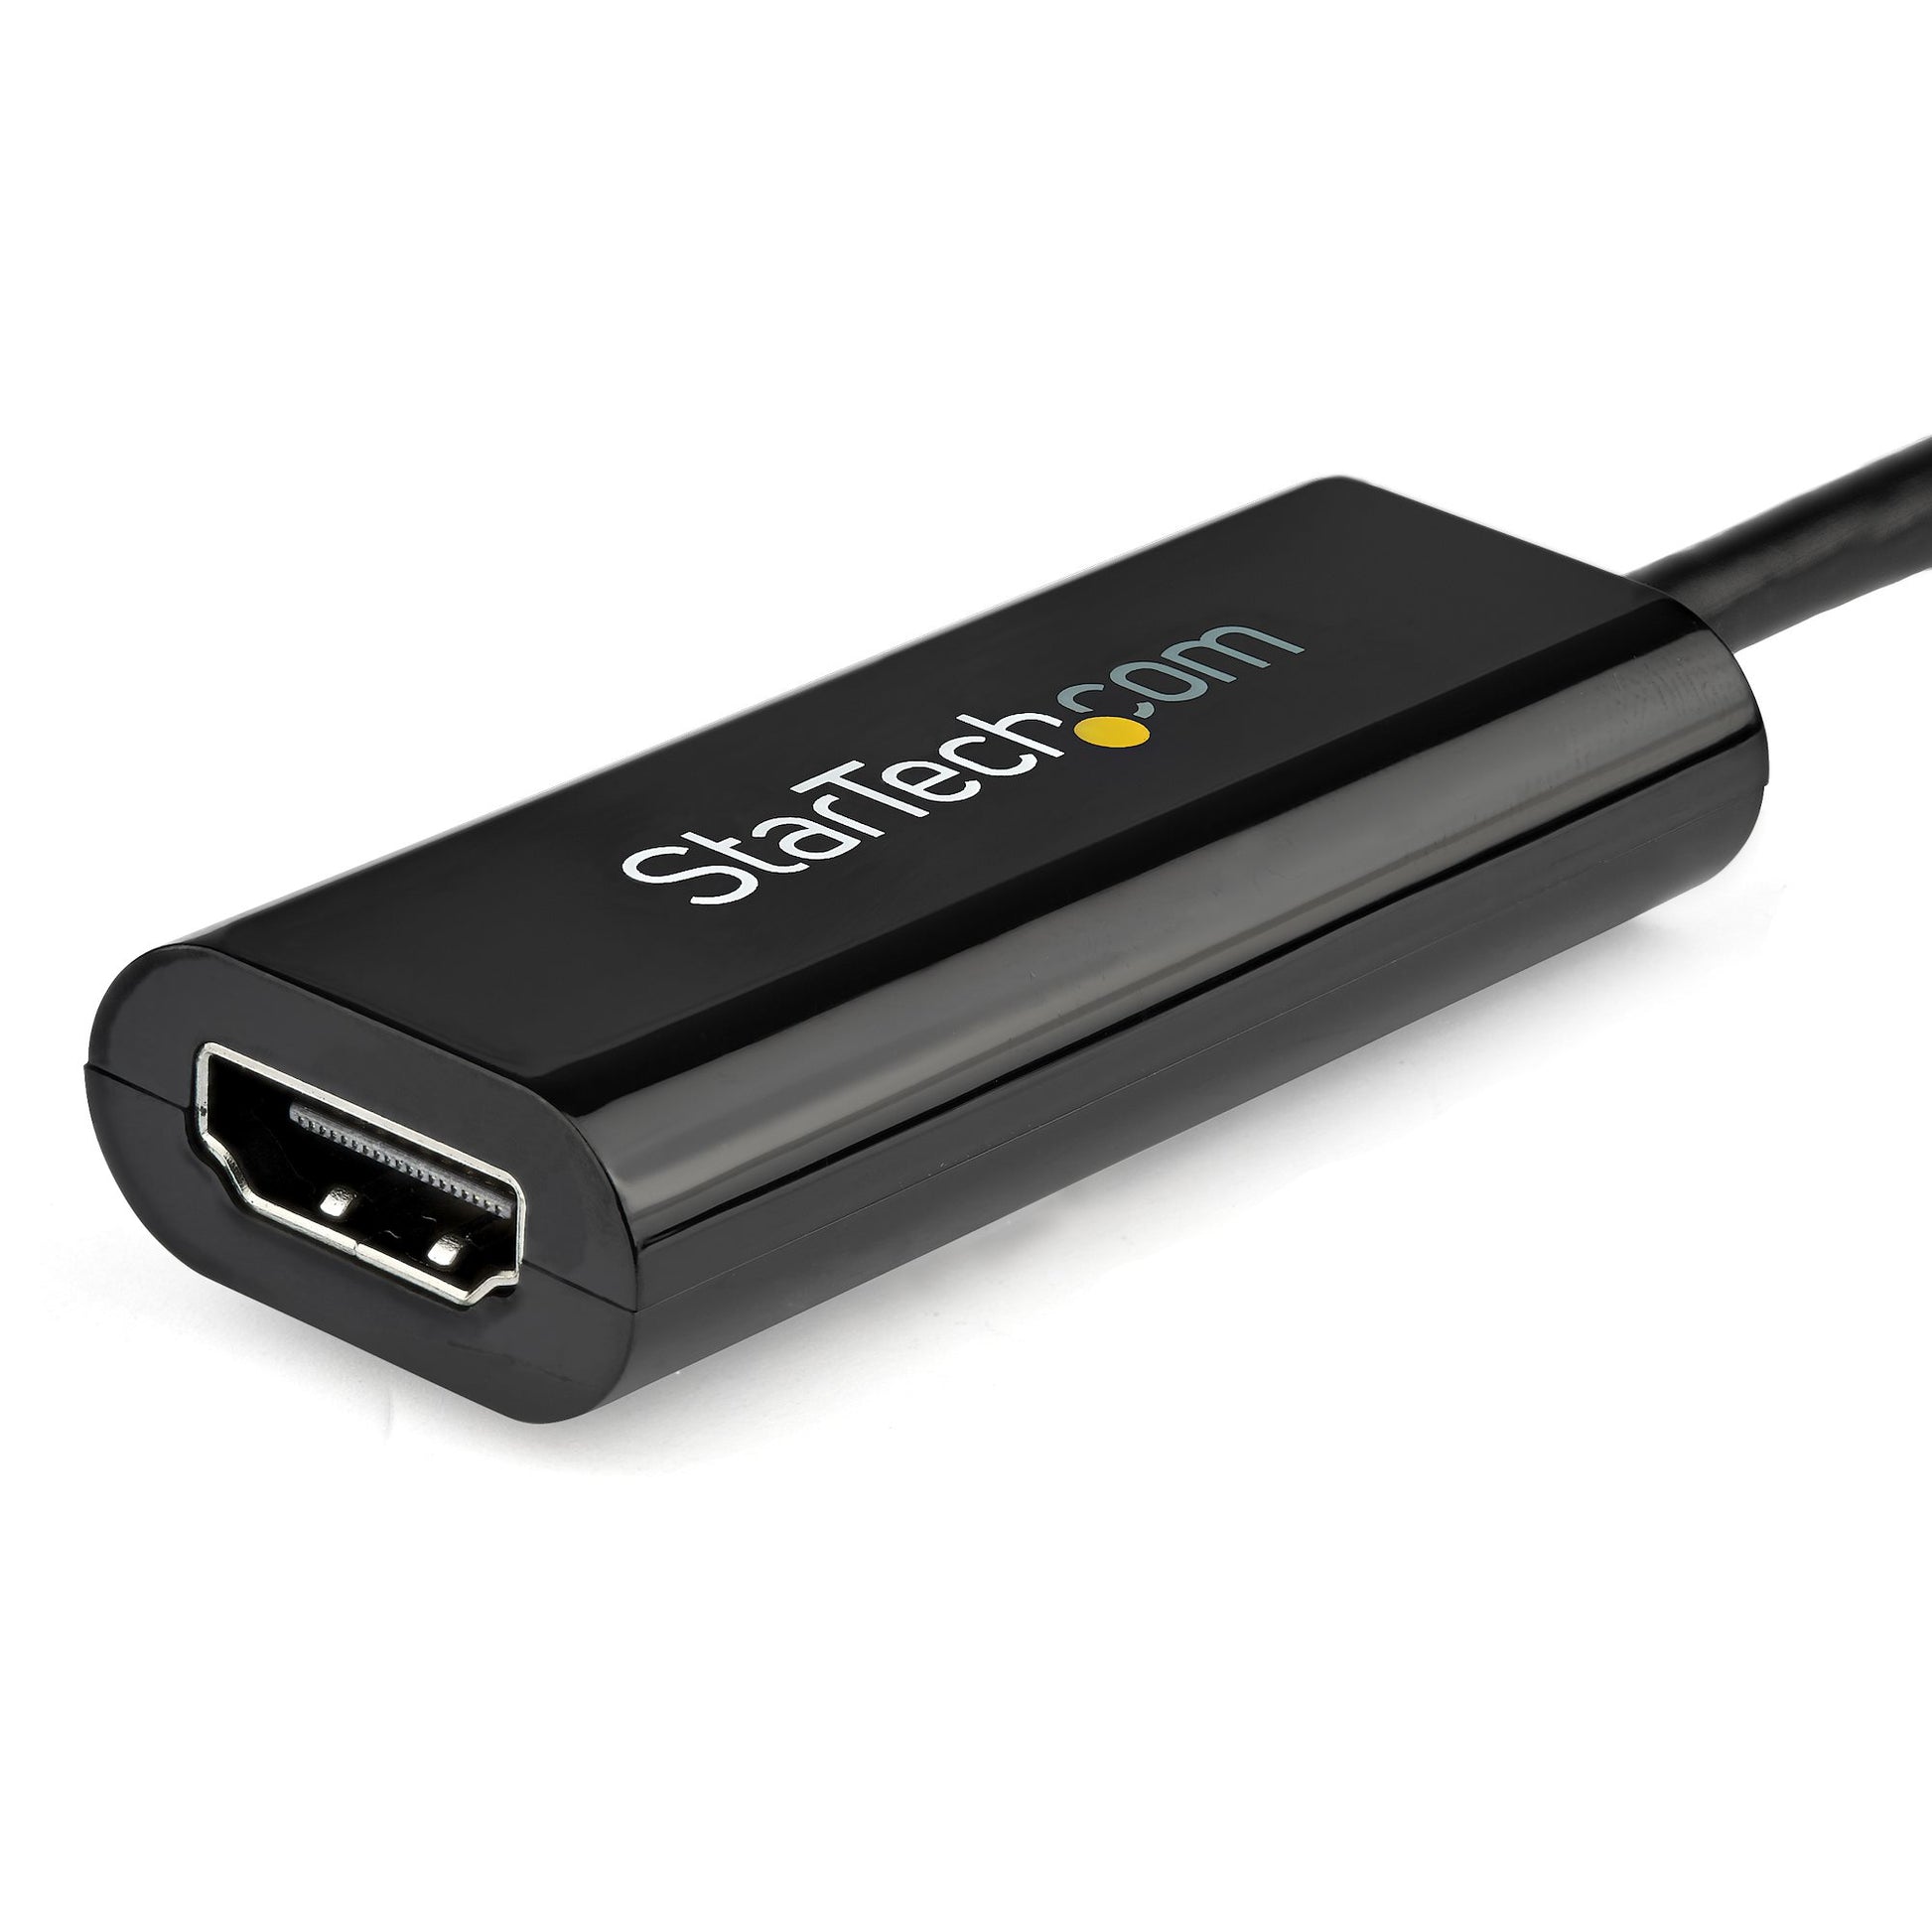 StarTech.com USB 3.0 to HDMI Adapter - 1080p (1920x1200) - Slim/Compact USB Type-A to HDMI Display Adapter Converter for Monitor - External Video & Graphics Card - Black - Windows Only-1